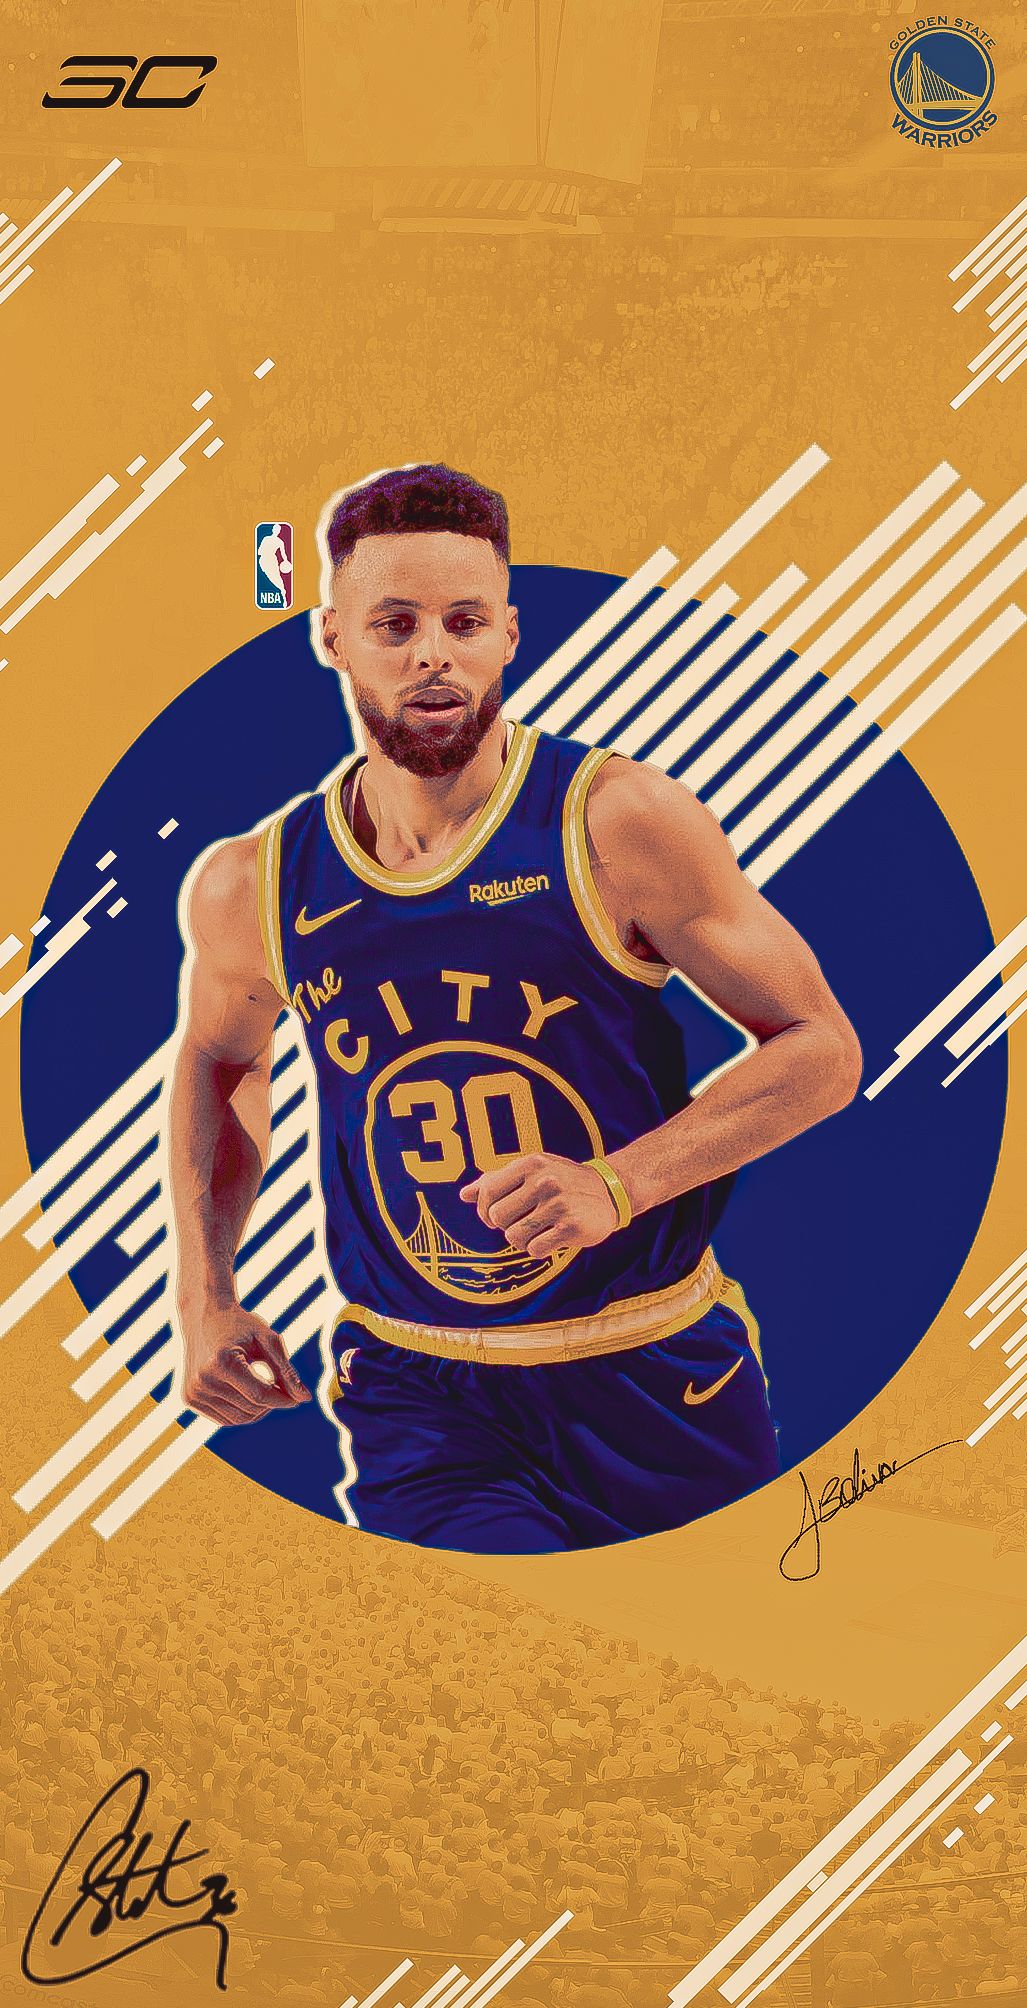 HD stephen curry wallpapers  Peakpx